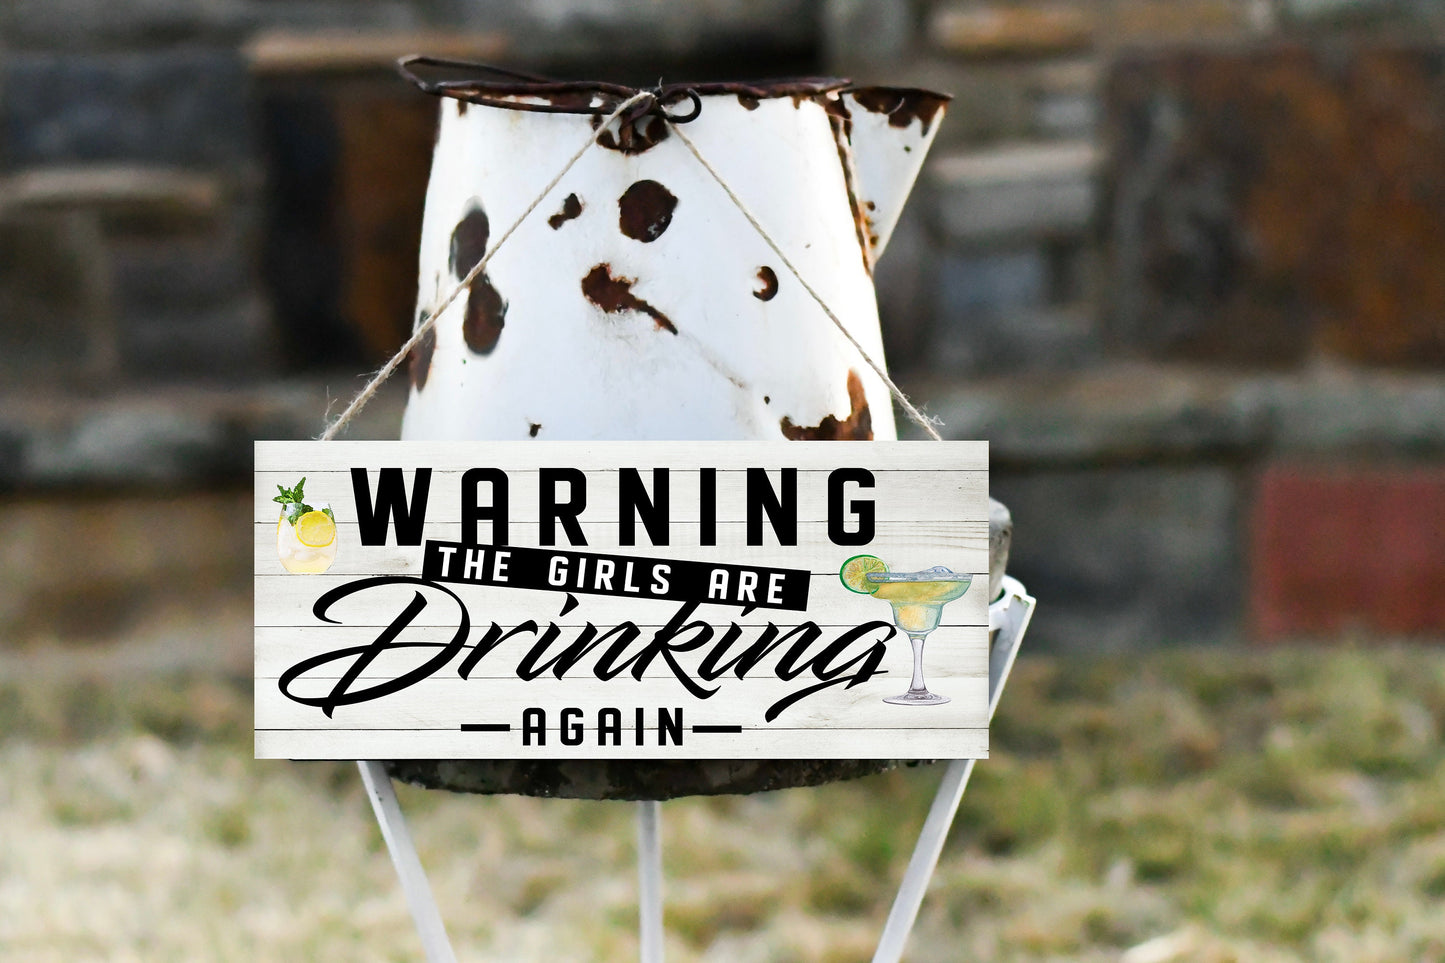 Warning Girls Drinking Again Twisted R Design Farmhouse Wood Sign, Wood Decorative Wall Signs 5" x 10" Wood Wall Decor Hanging Wall Sign